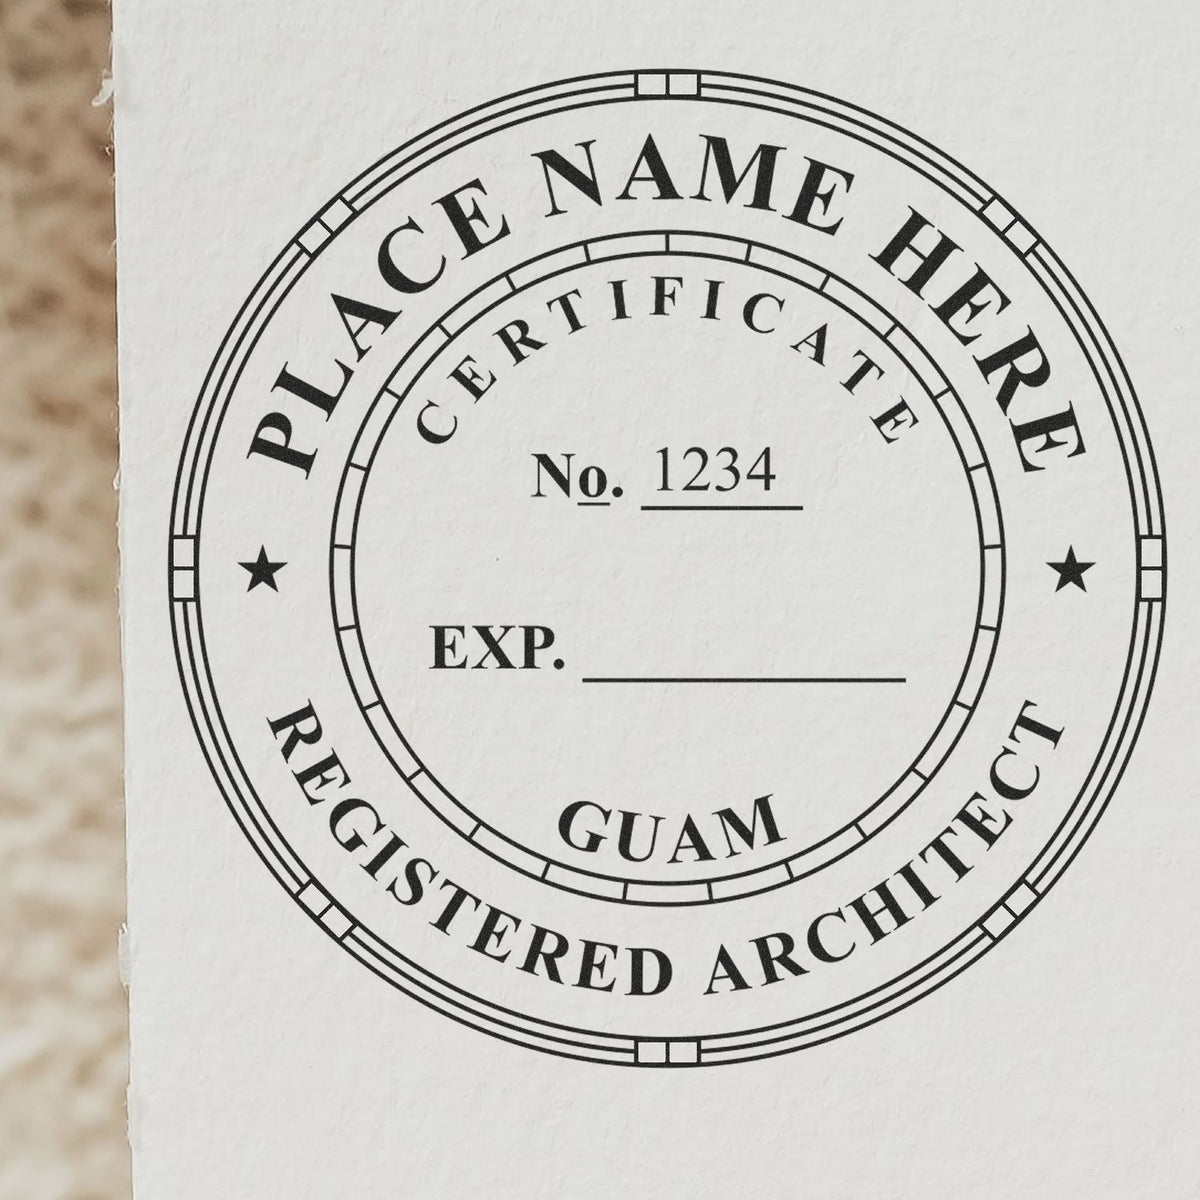 Slim Pre-Inked Guam Architect Seal Stamp in use photo showing a stamped imprint of the Slim Pre-Inked Guam Architect Seal Stamp